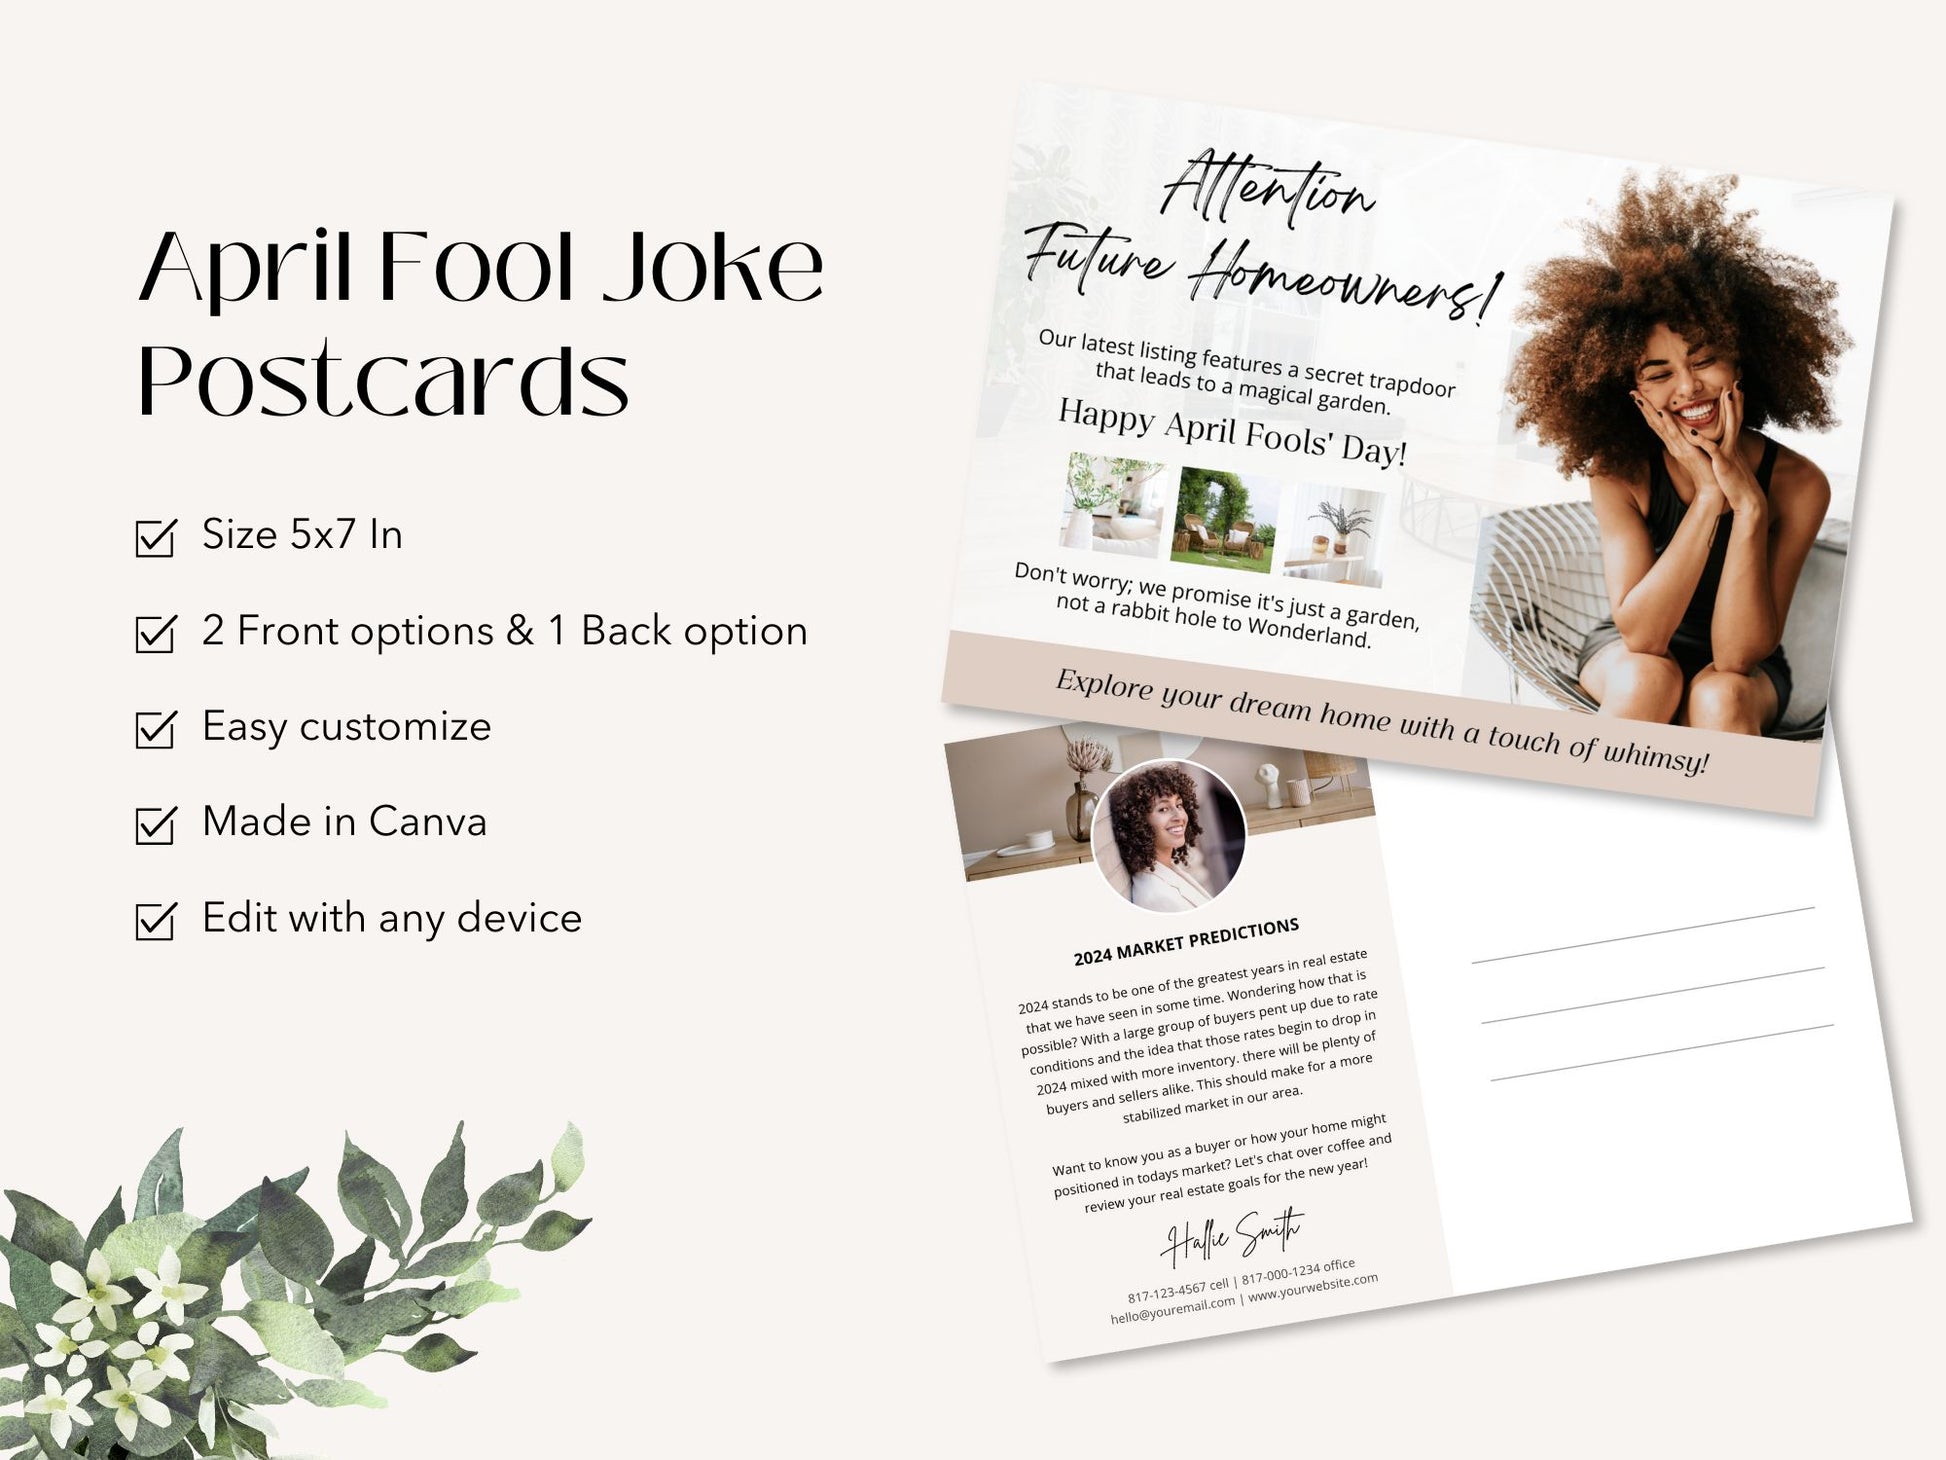 April Fool Joke Postcards - Professionally designed real estate postcards for lighthearted and playful communication during the April Fool's season.